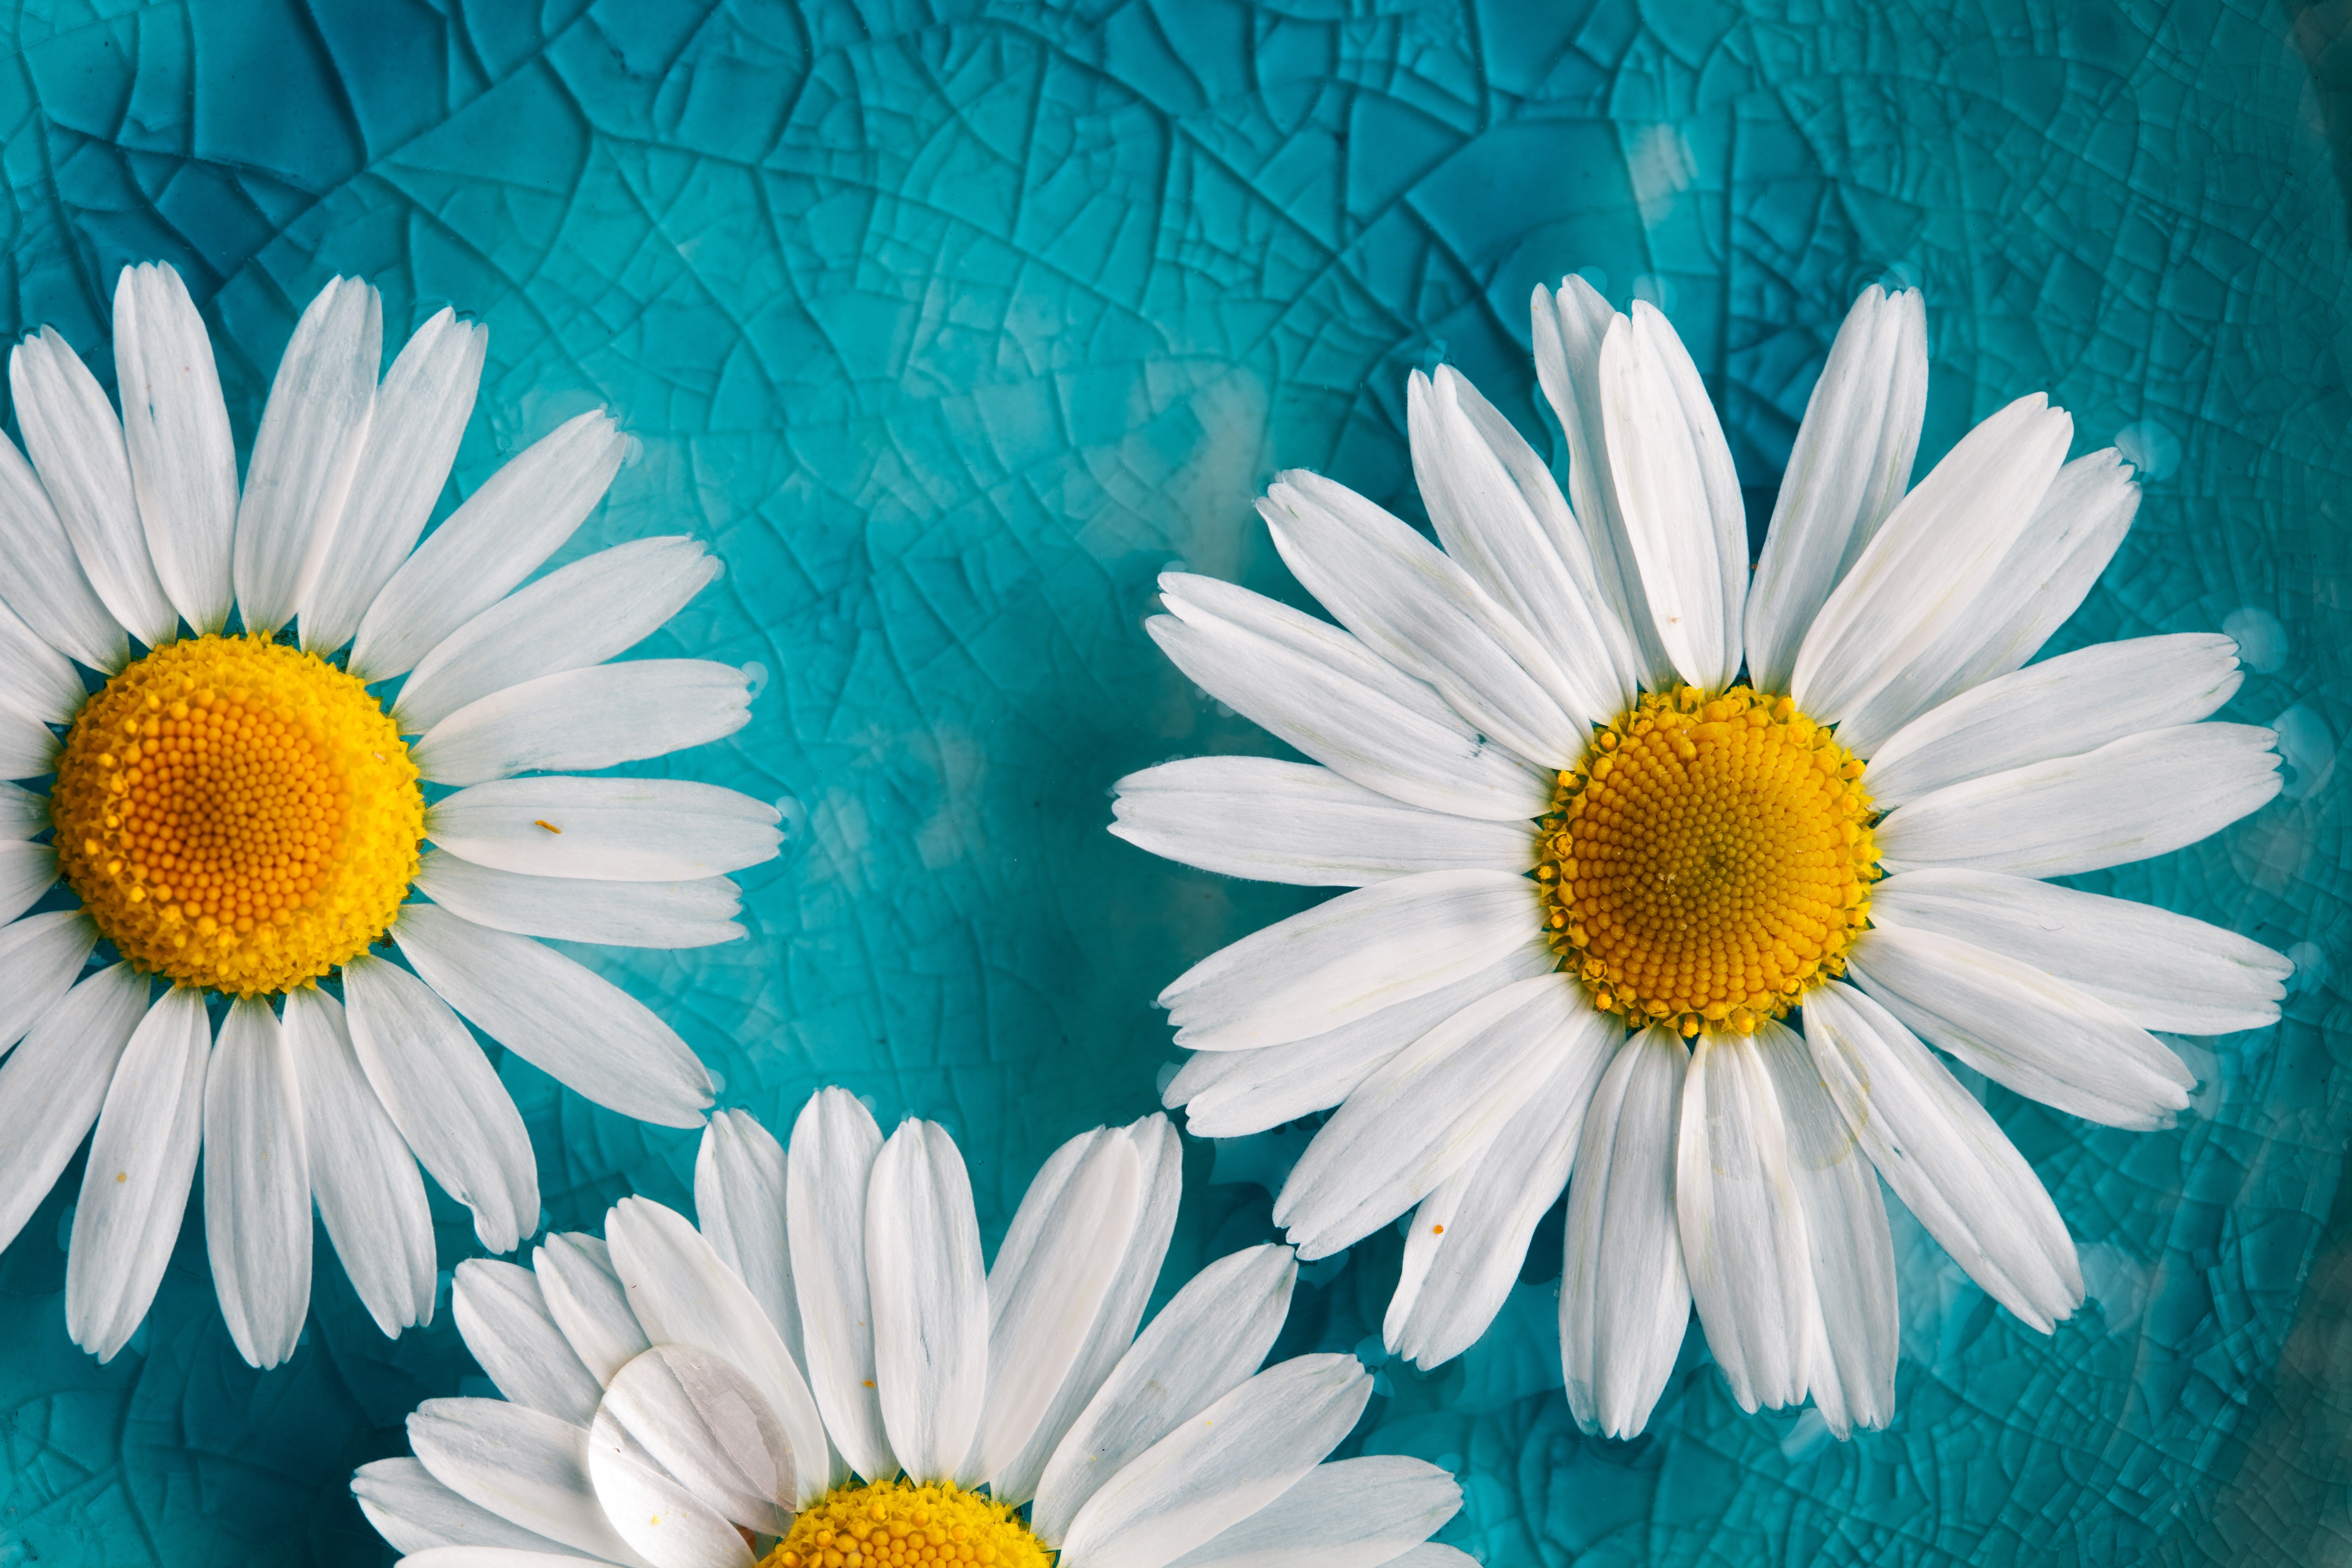 Artistic Blue Camomile Daisy Flower Glass Nature White Flower 7616x5077